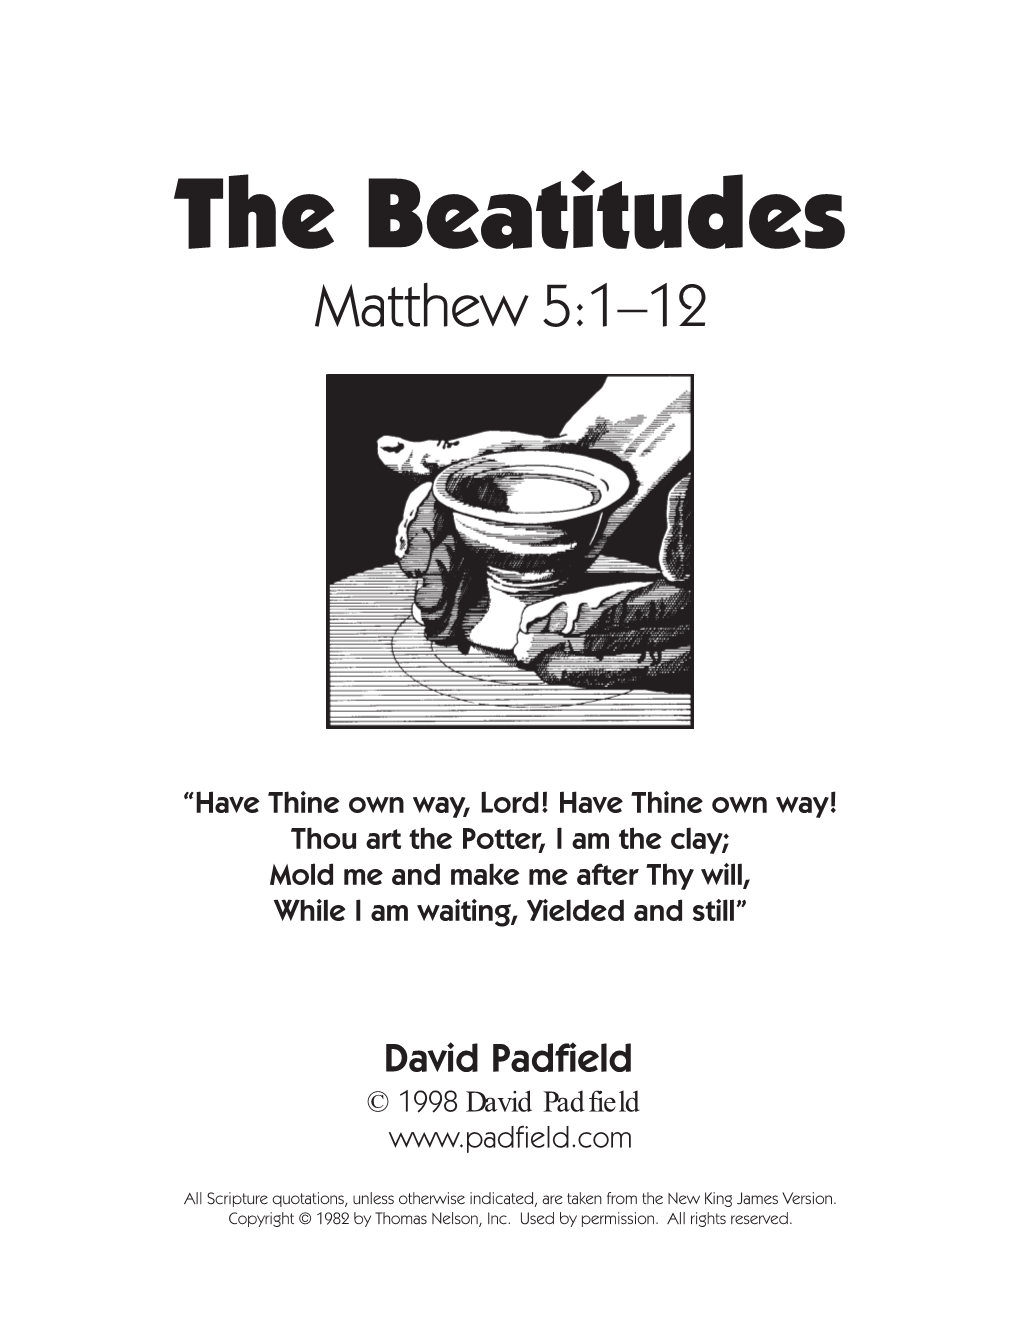 The Beatitudes and the Sermon on the Mount